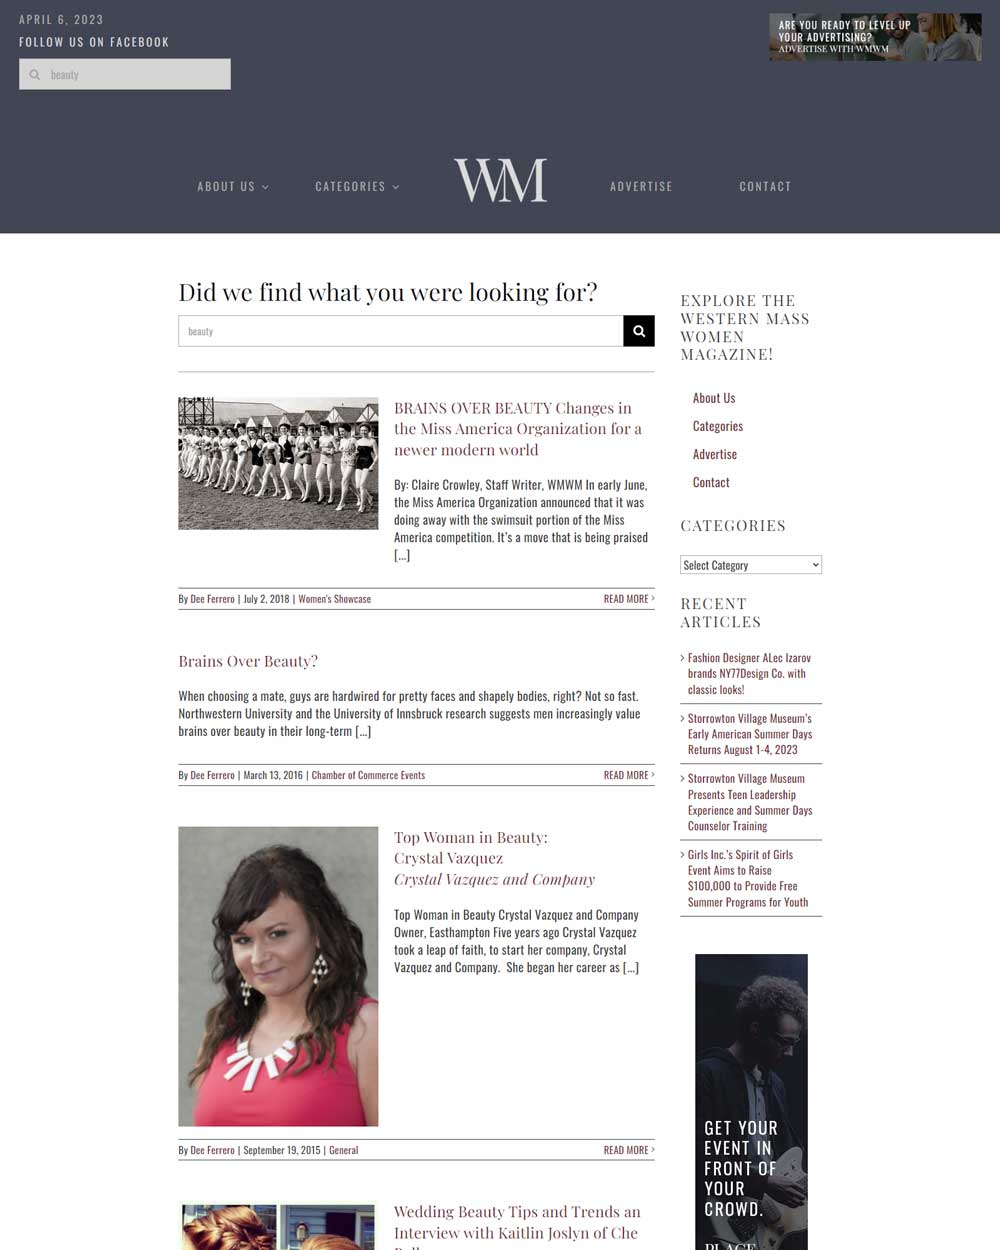 redesign of western mass women magazine archive page